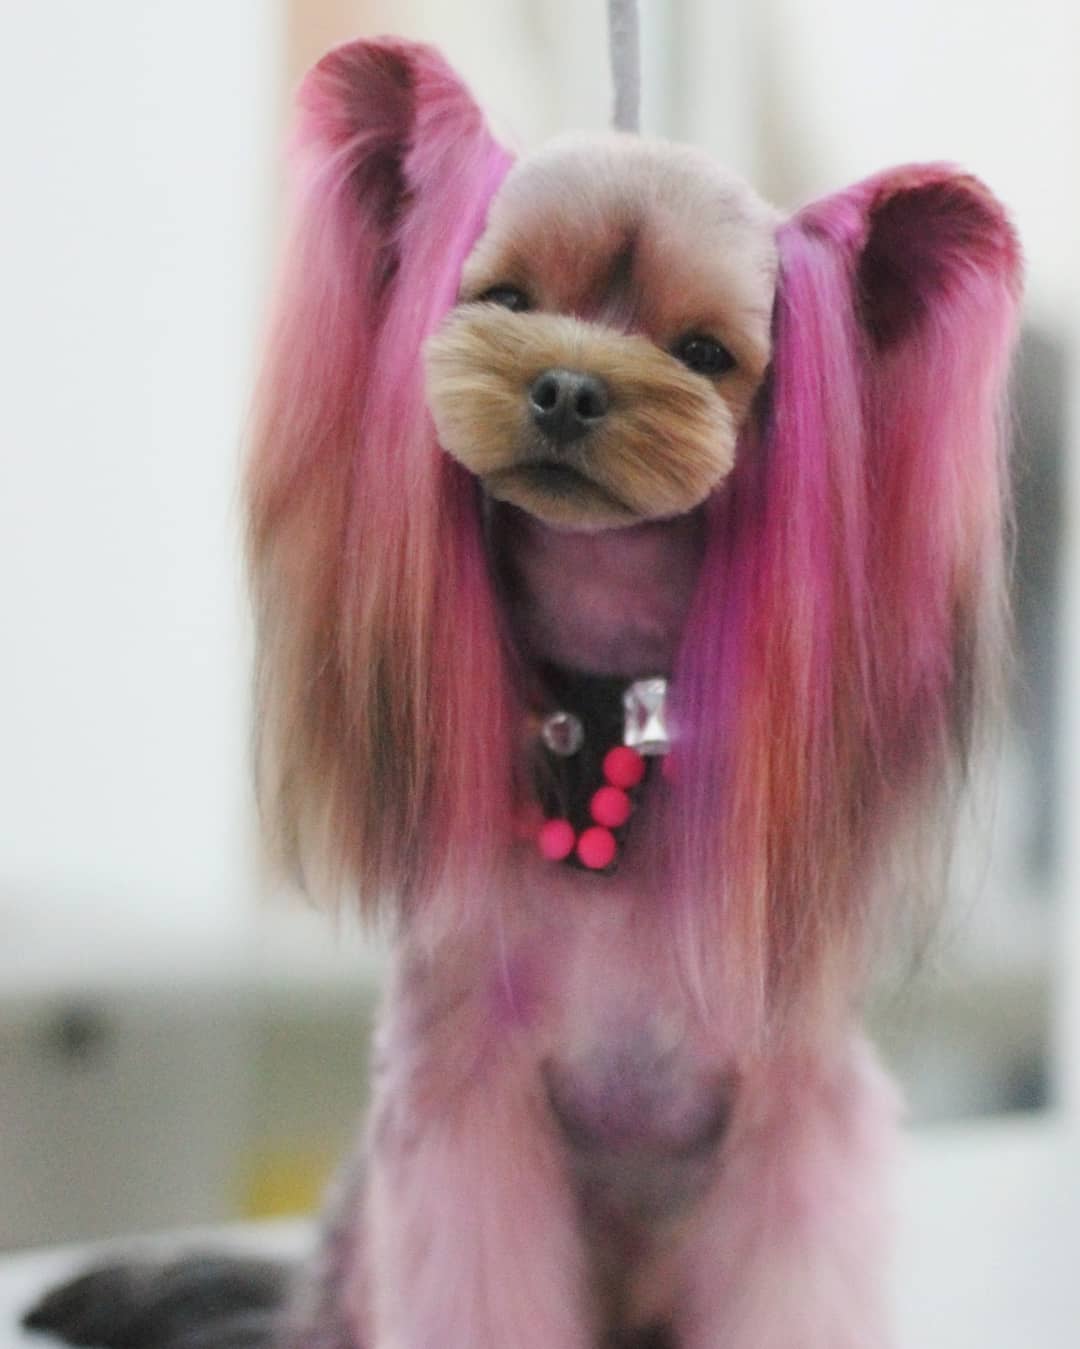 Yorkshire Terrier with its hair dyed in pink color